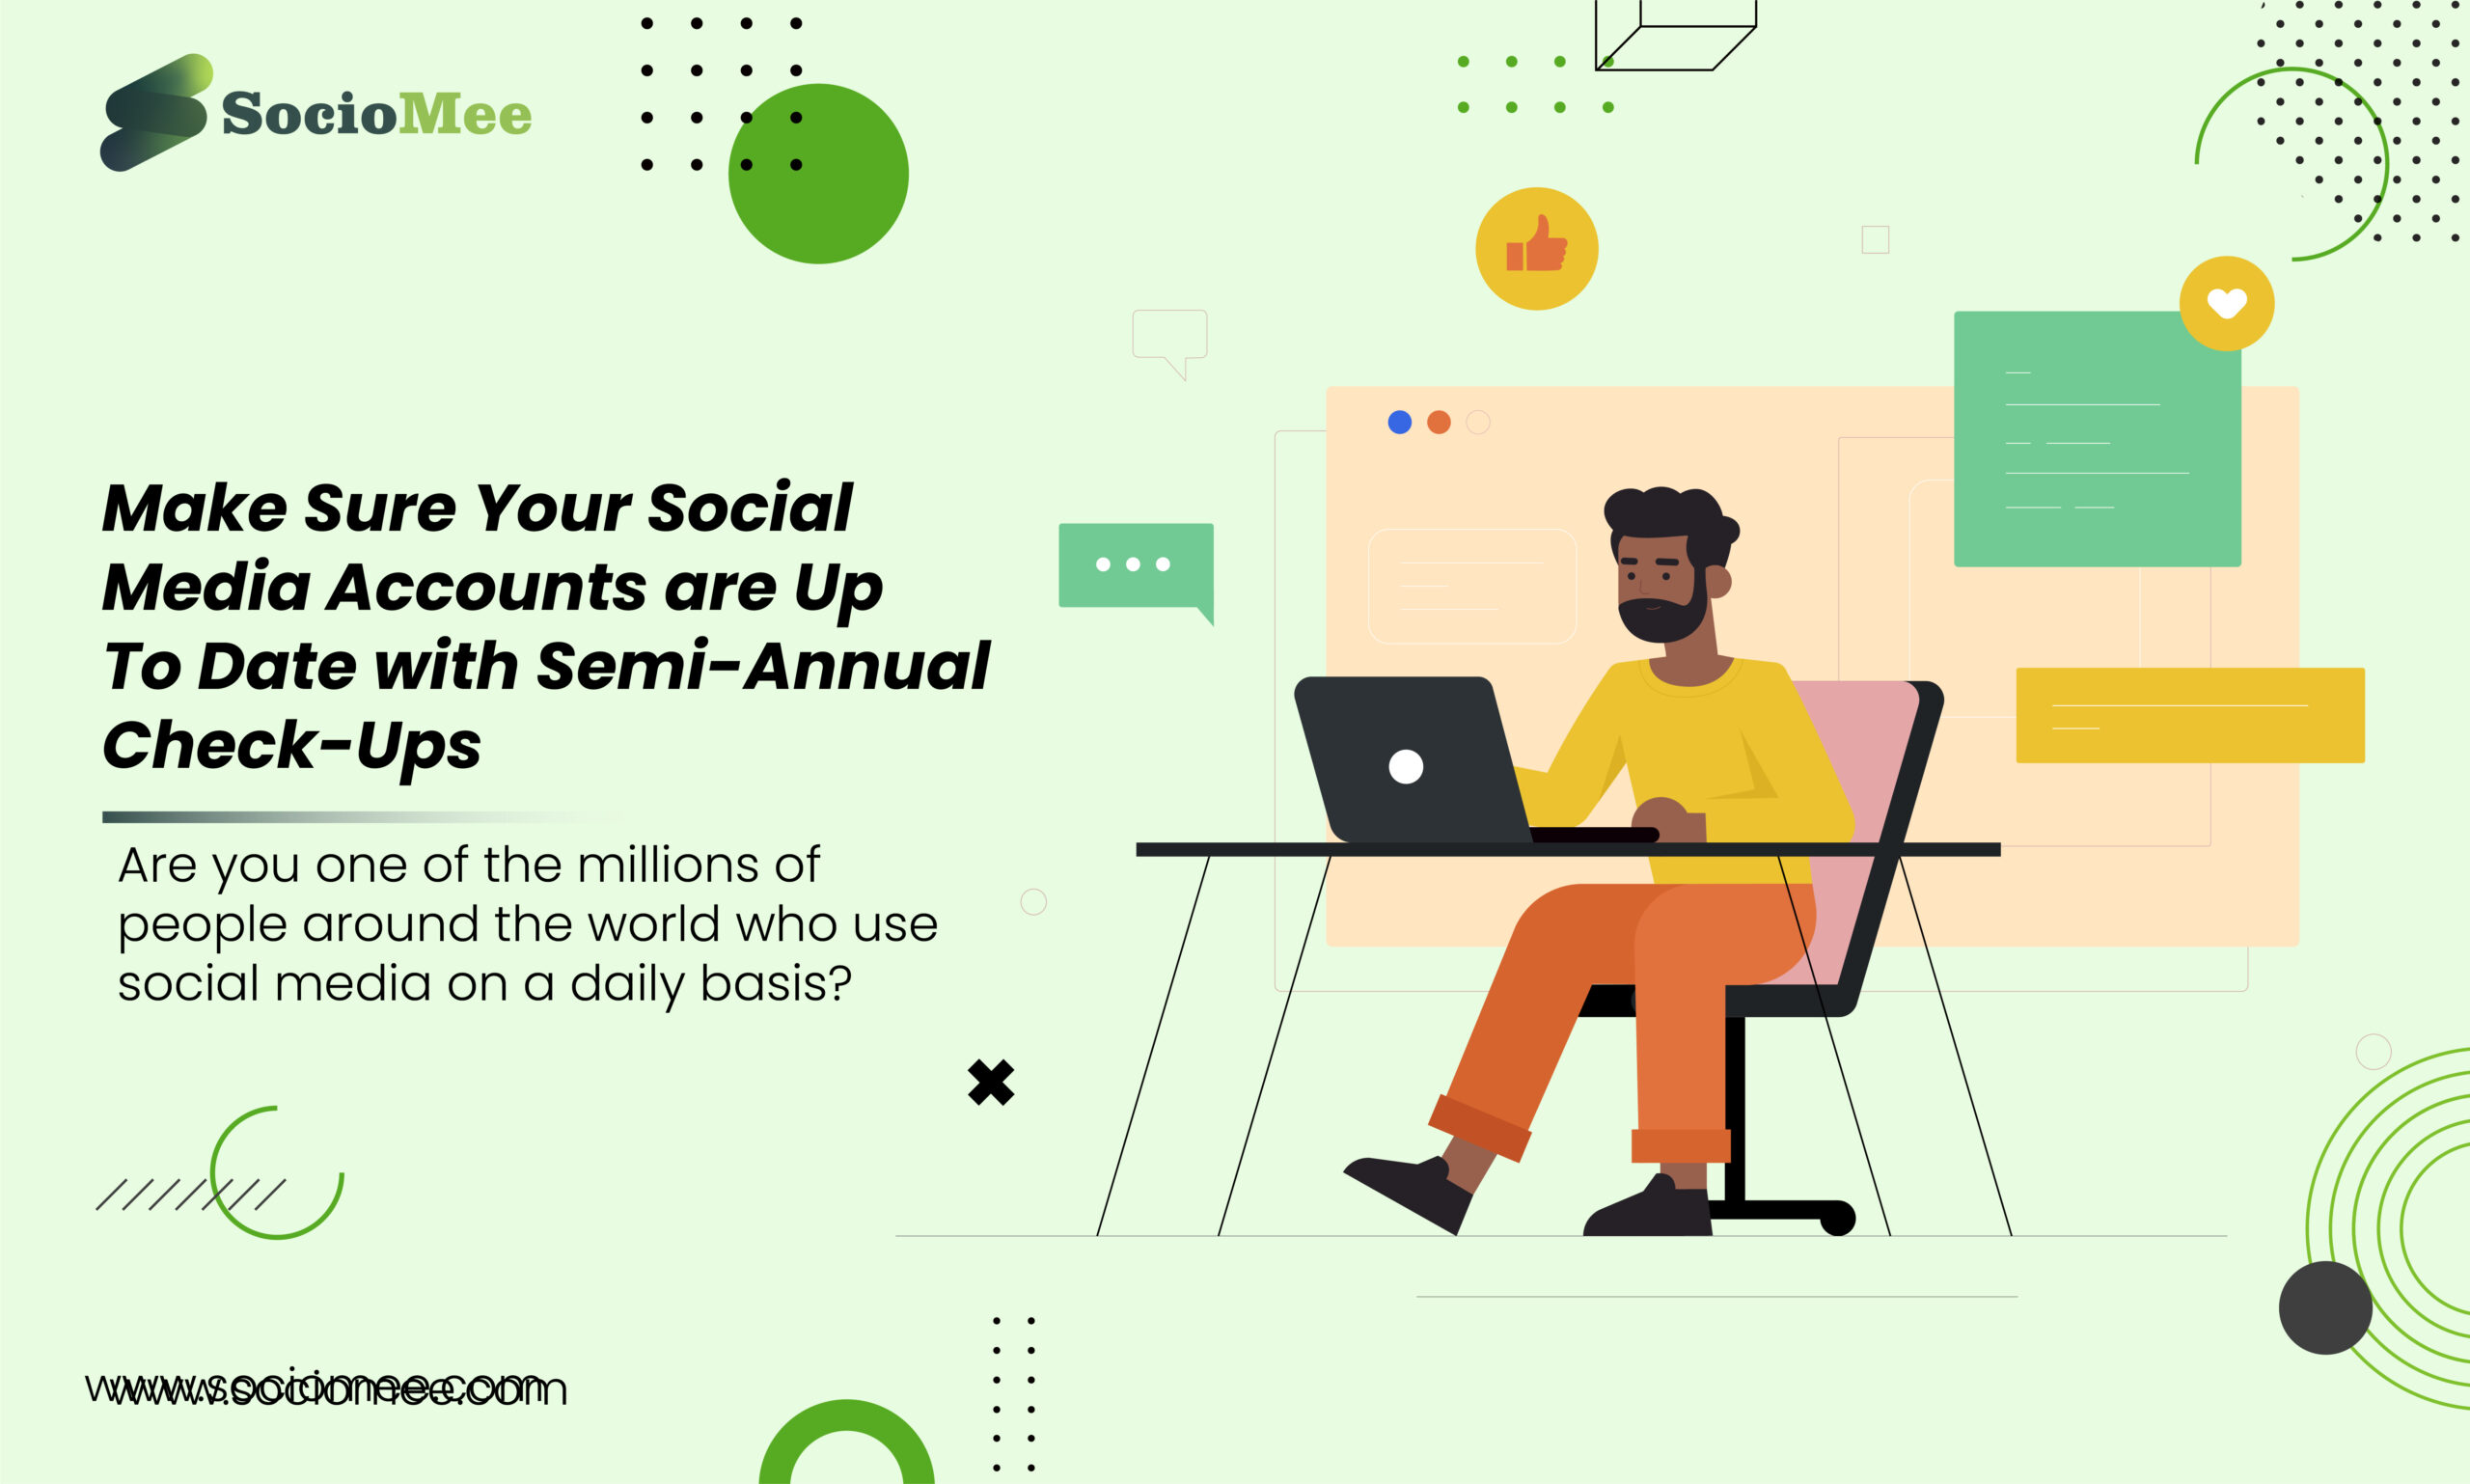 Make Sure Your Social Media Date with Semi-Annual Check-Ups